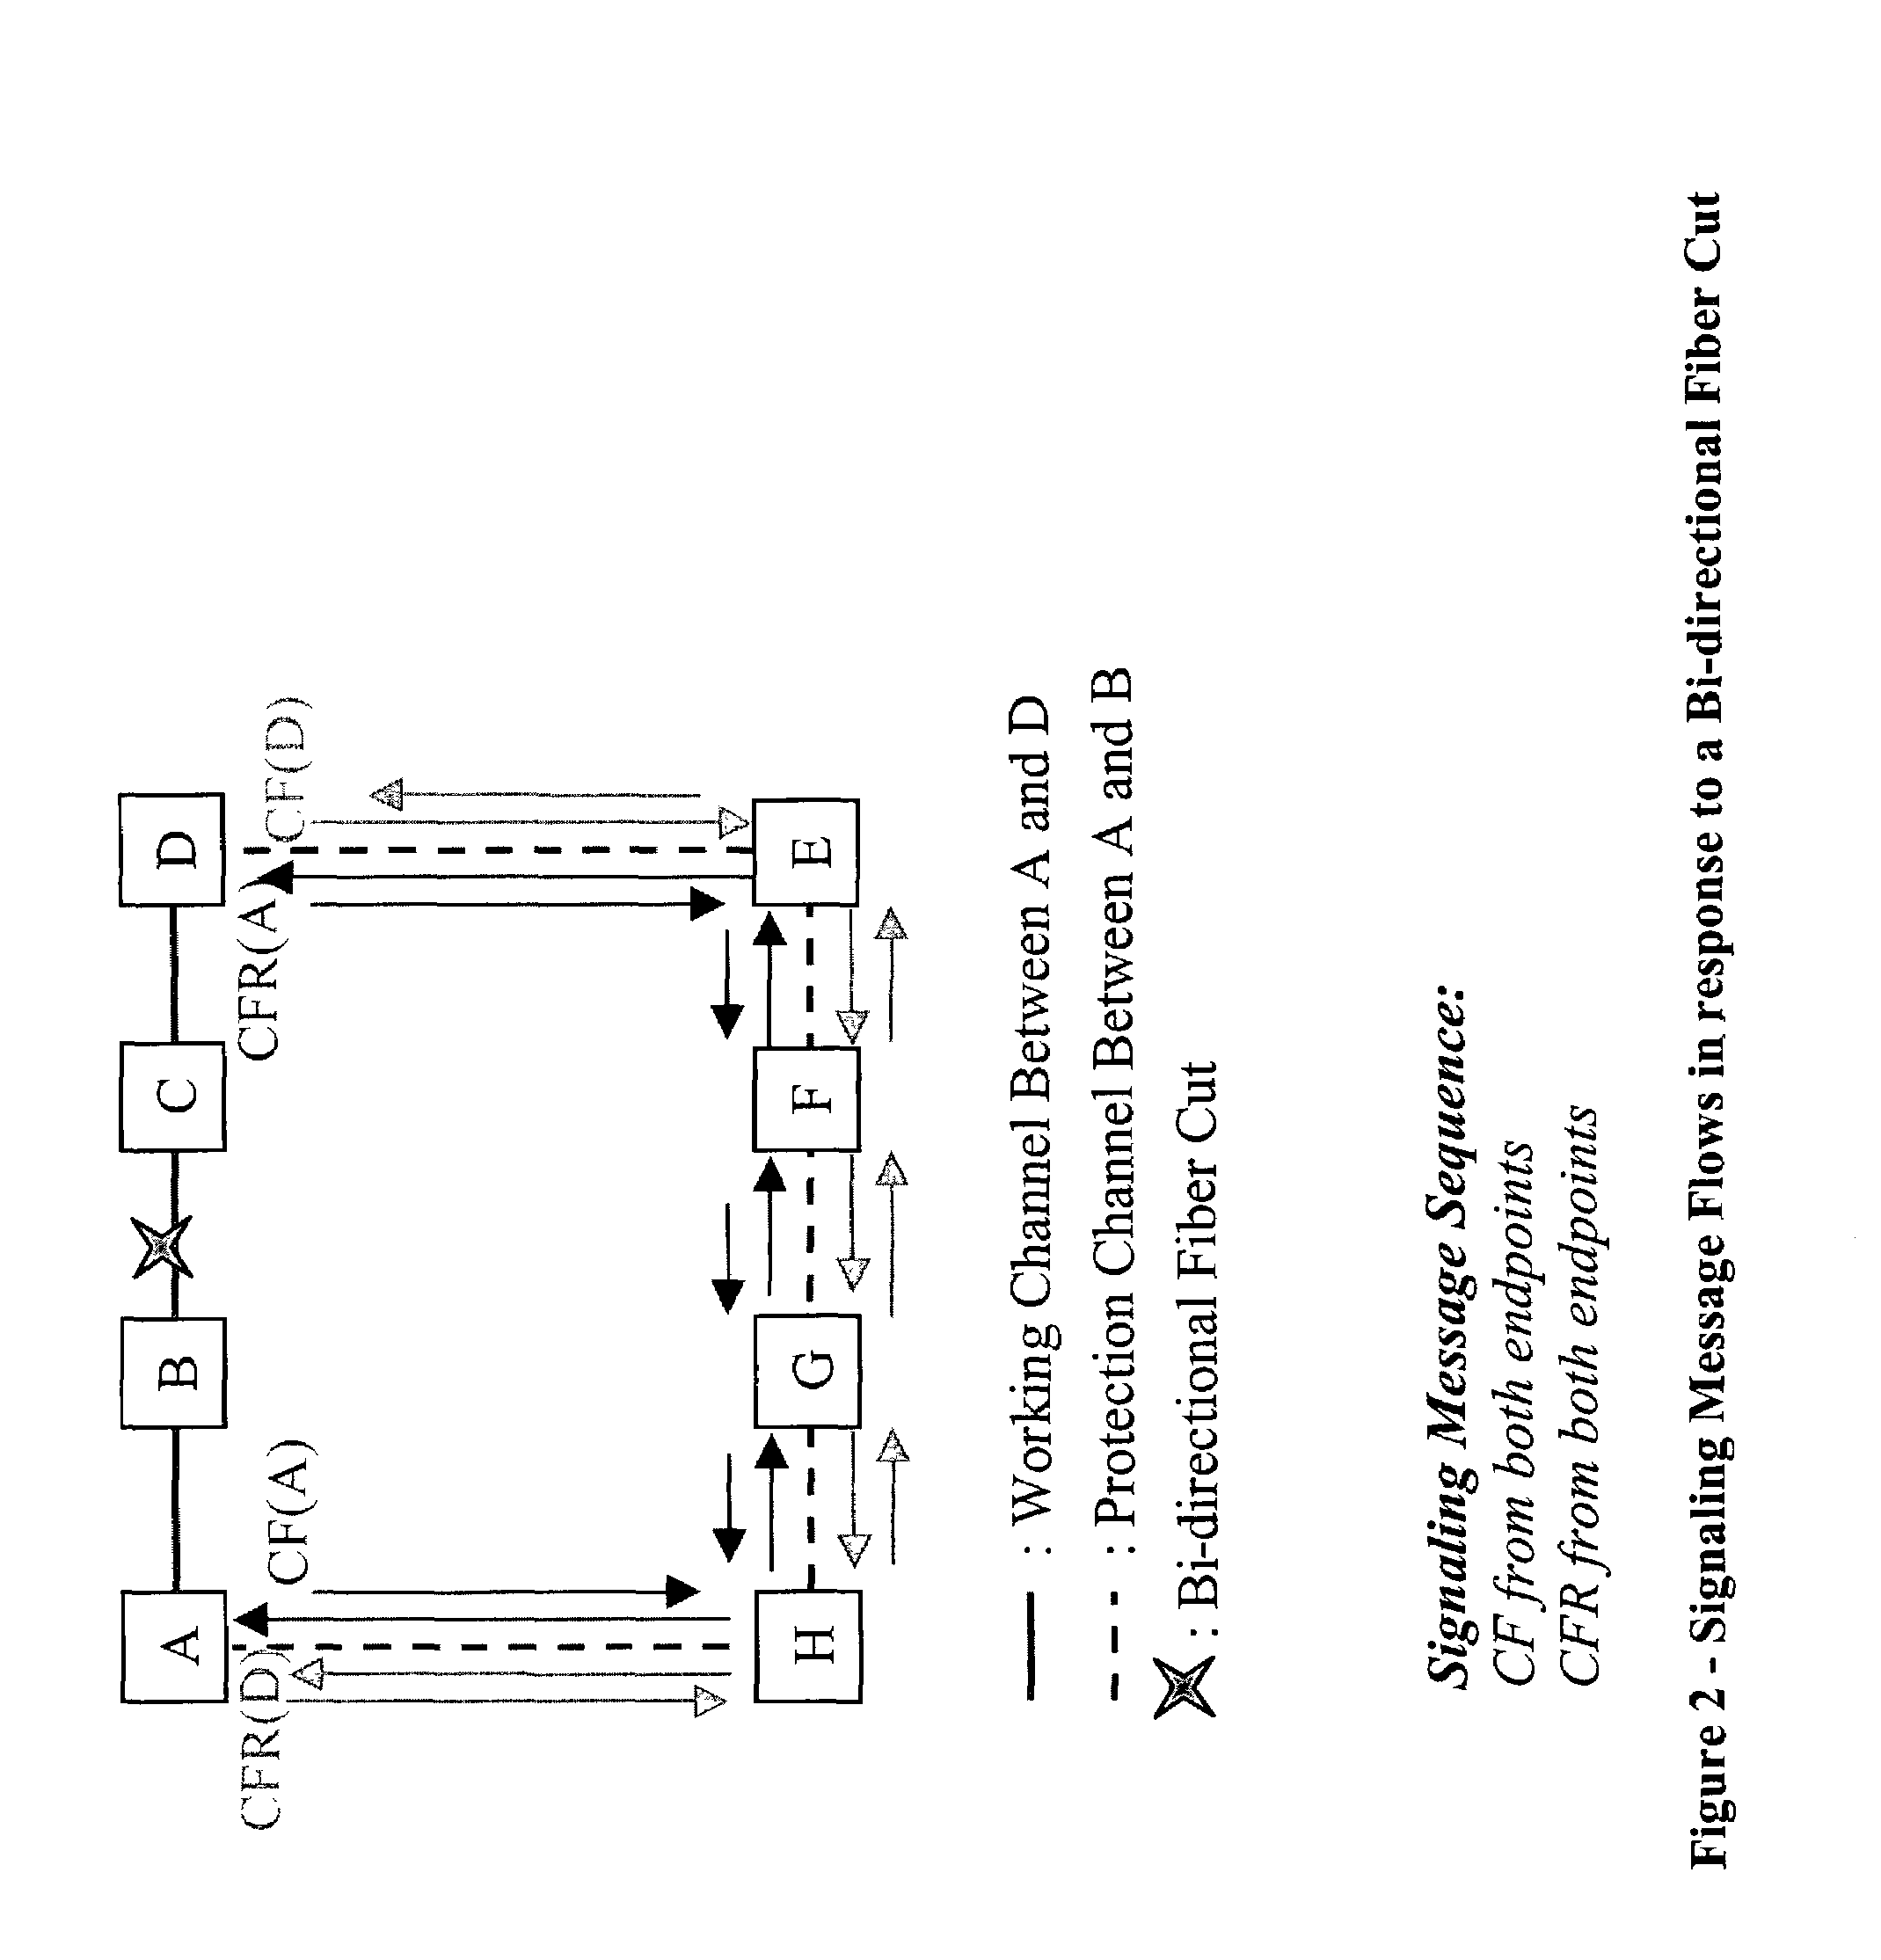 Optical automatic protection switching mechanism for optical channel shared protection rings